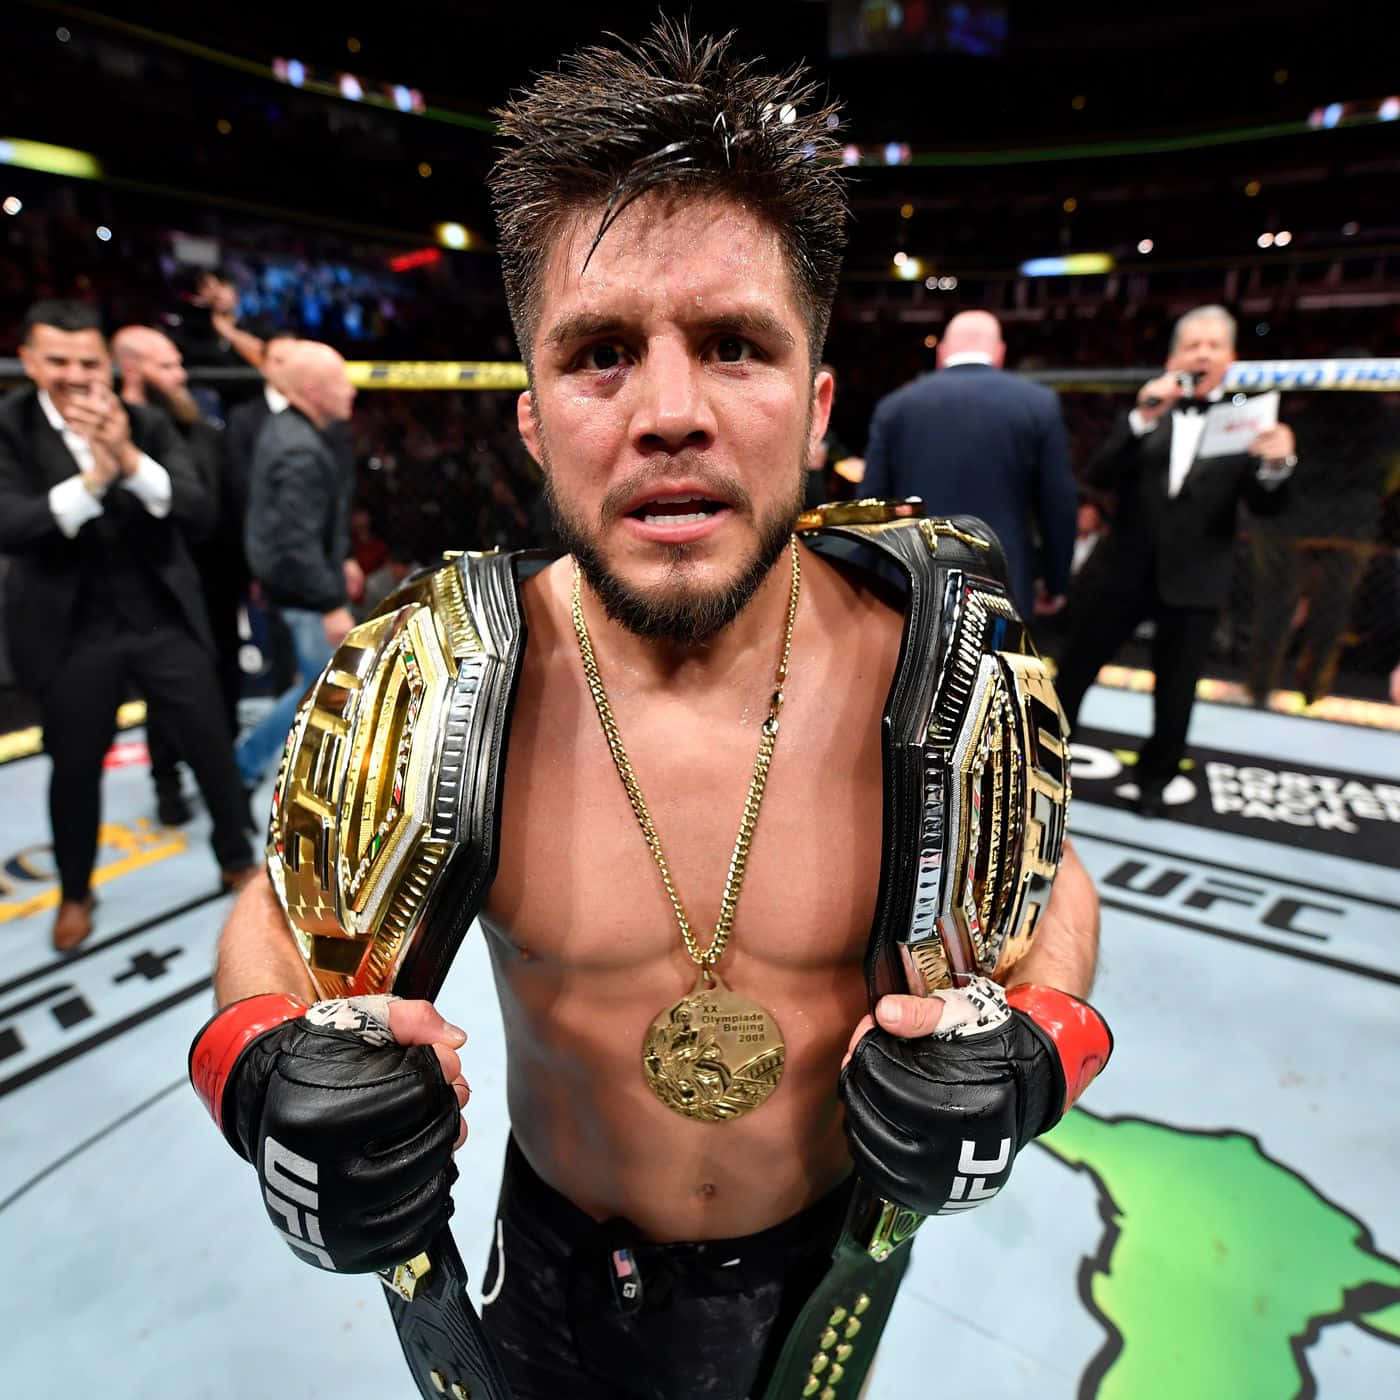 Henry Cejudo celebrates his victory and reign as 2019 Bantamweight Champion Wallpaper